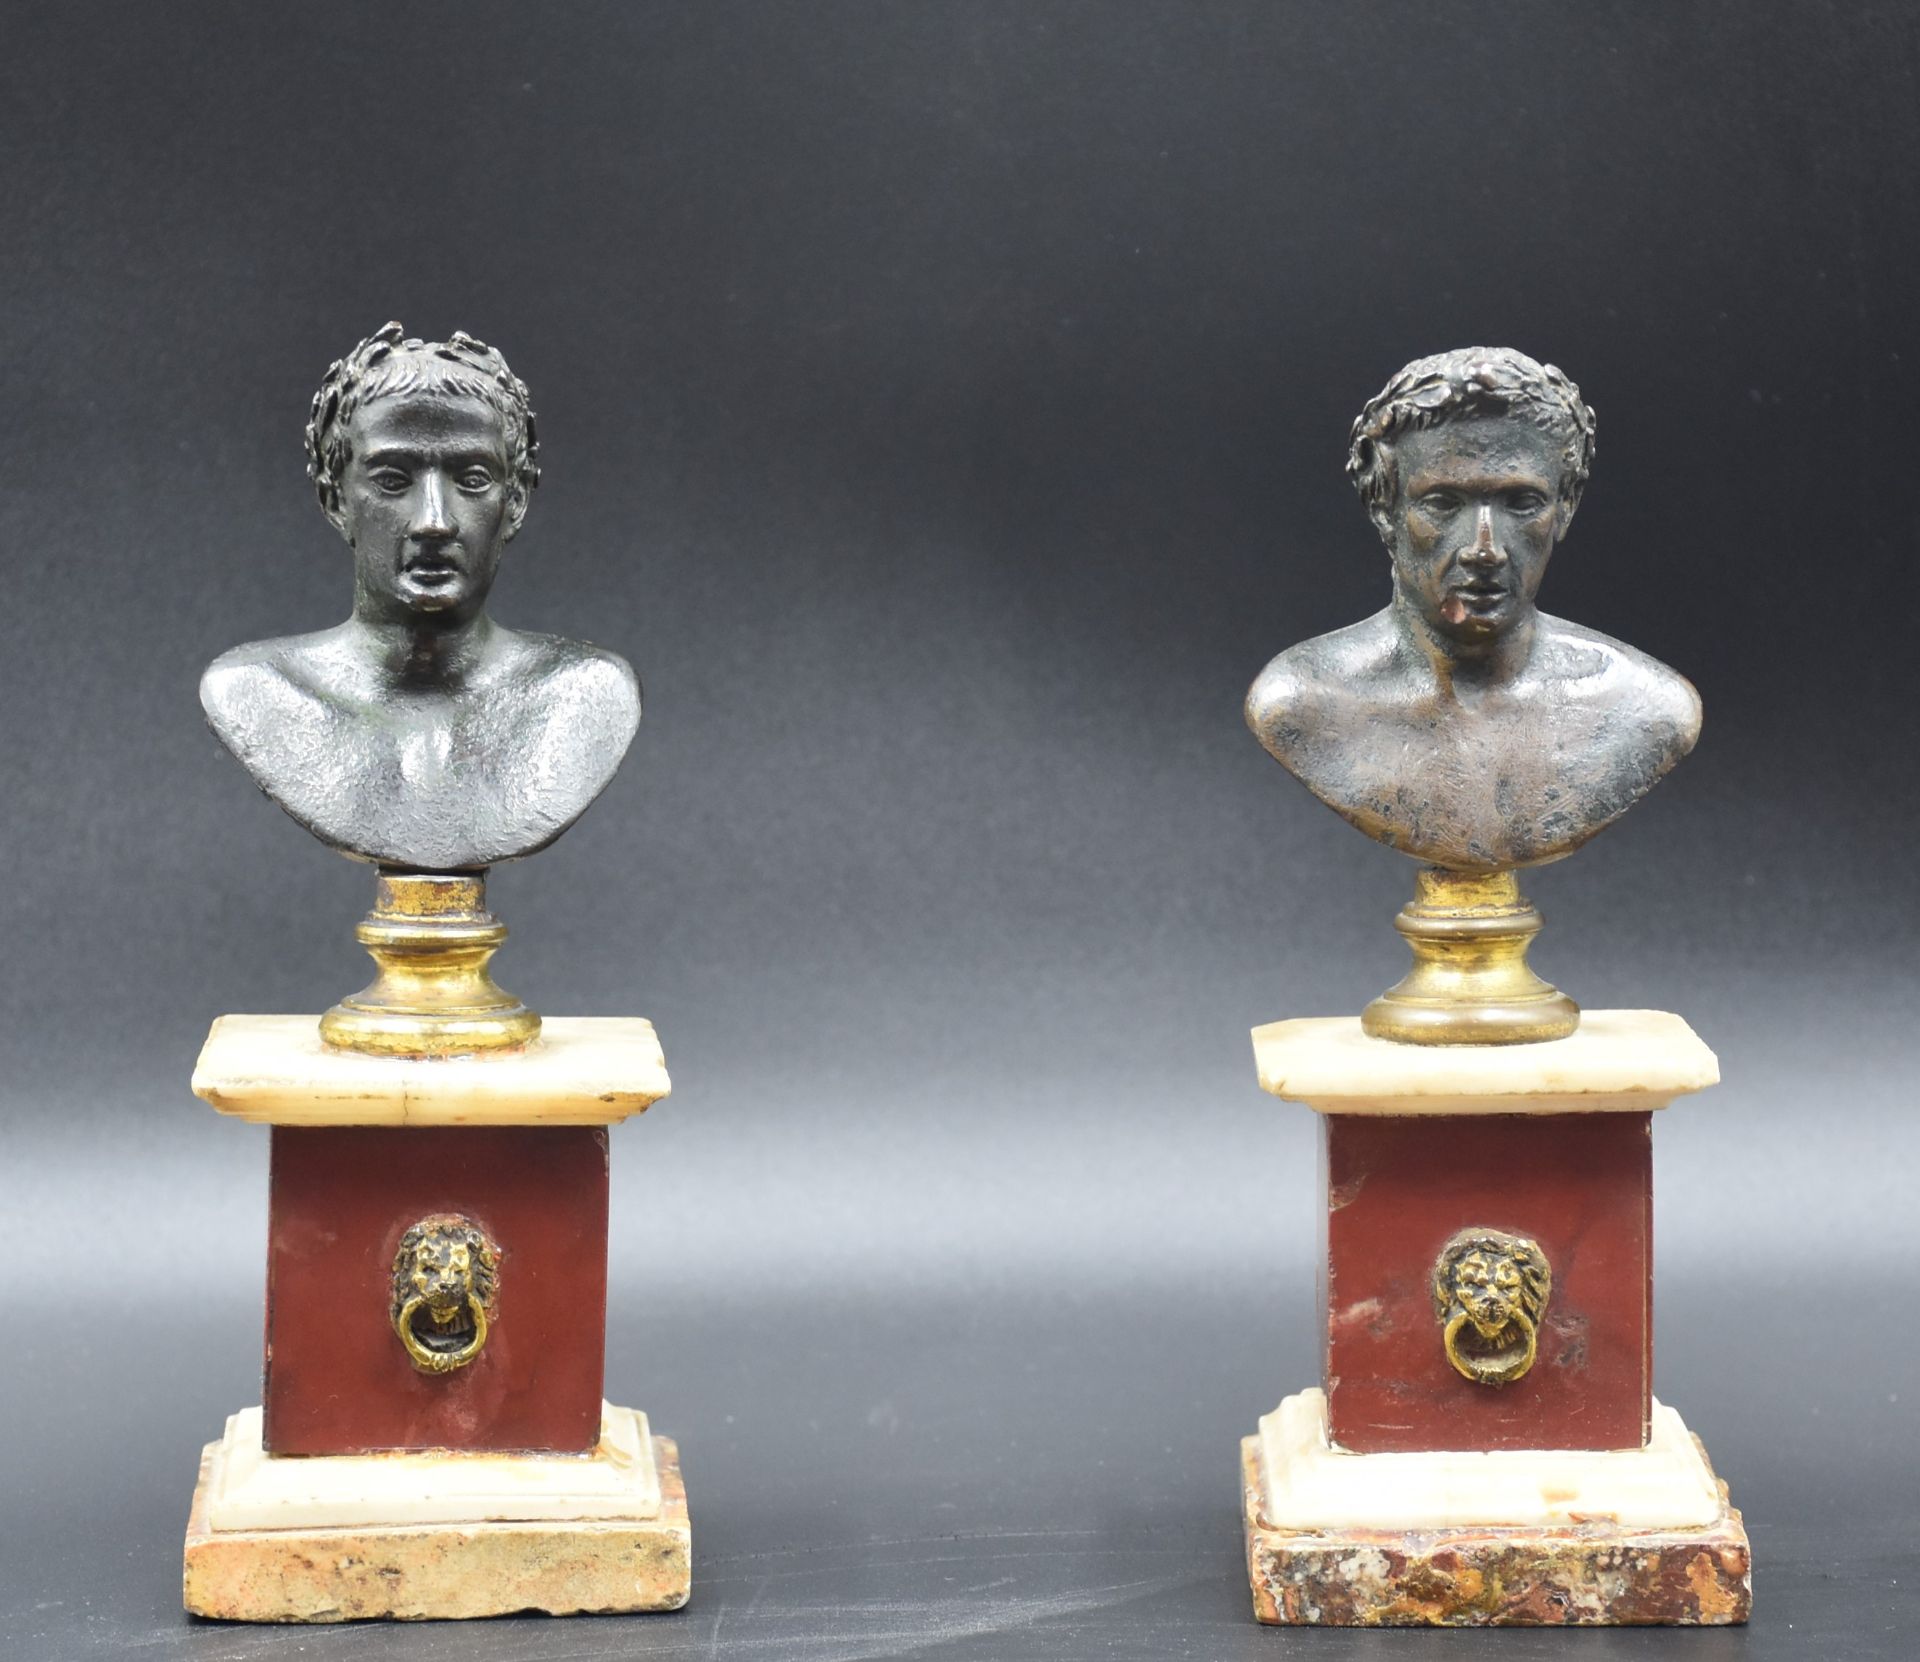 Pair of antique bronze busts on square marble bases composed of three different species. Bronze